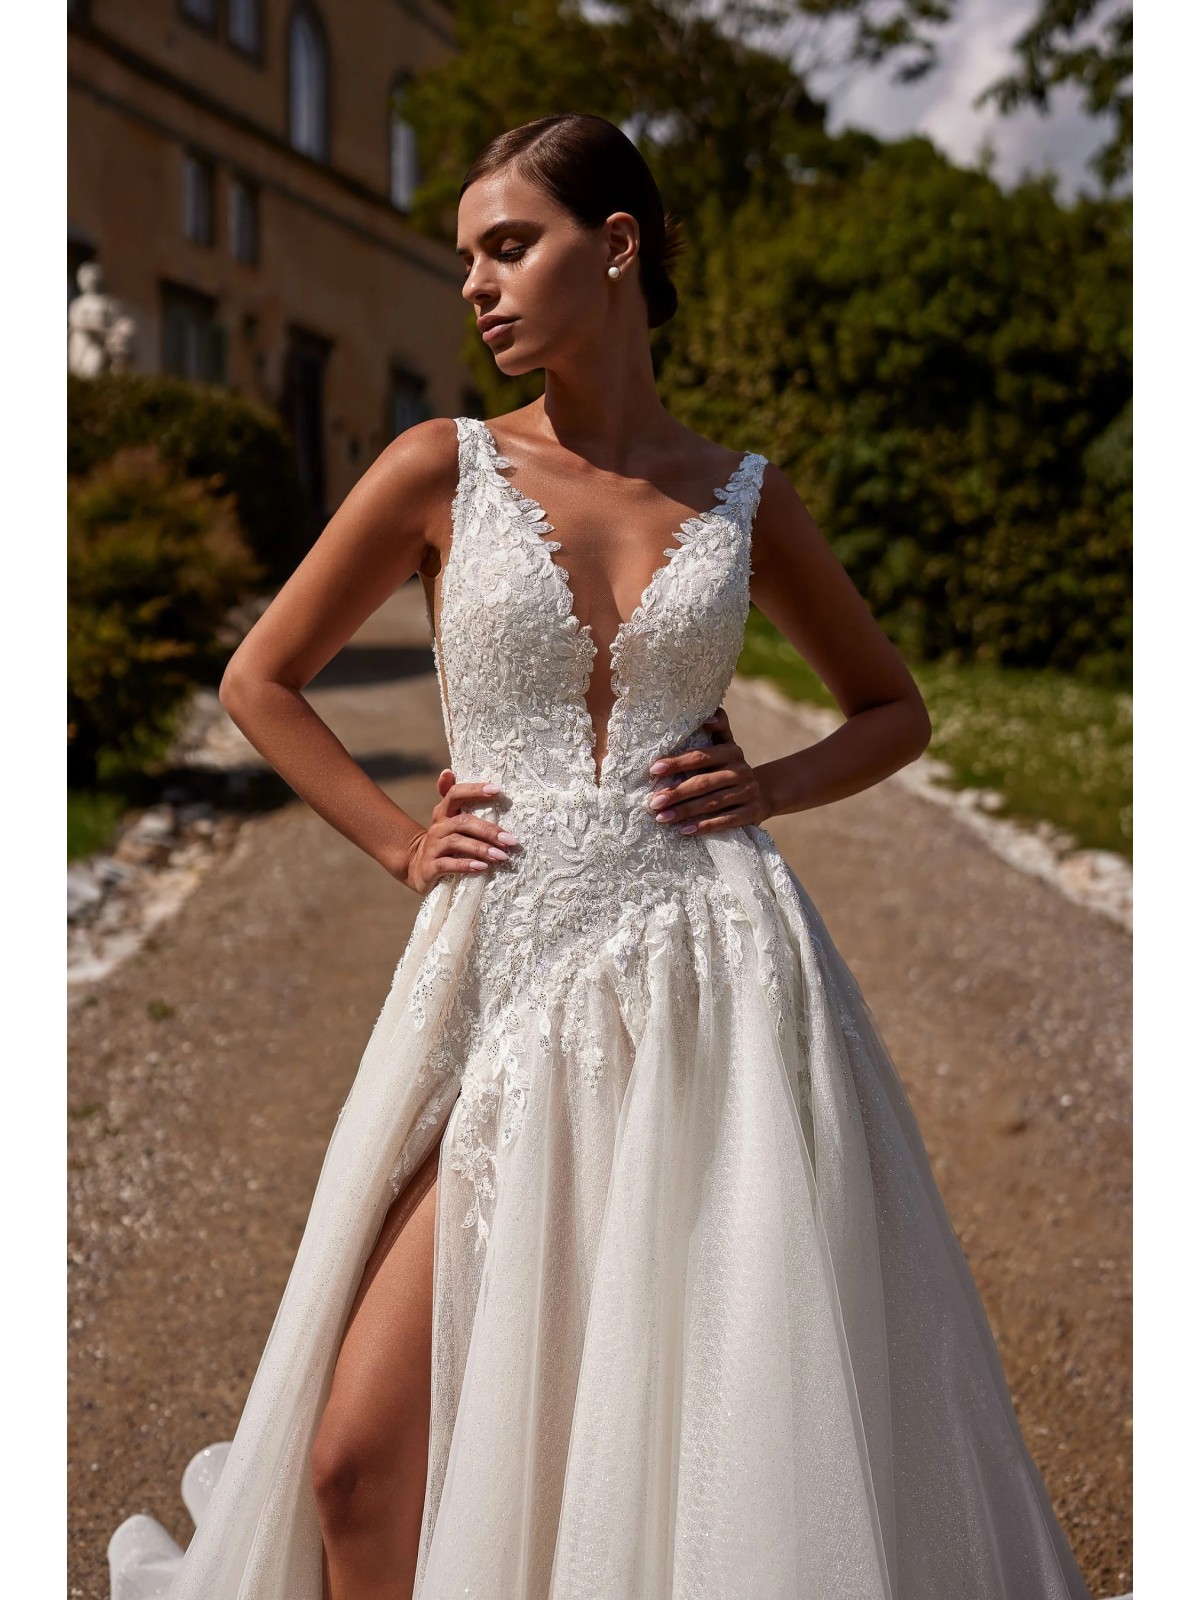 Luxury Wedding Dress - A-line Deep V-neck and a Slit on The Right Side - Dreamy Devotion - LIDA-01352.00.17